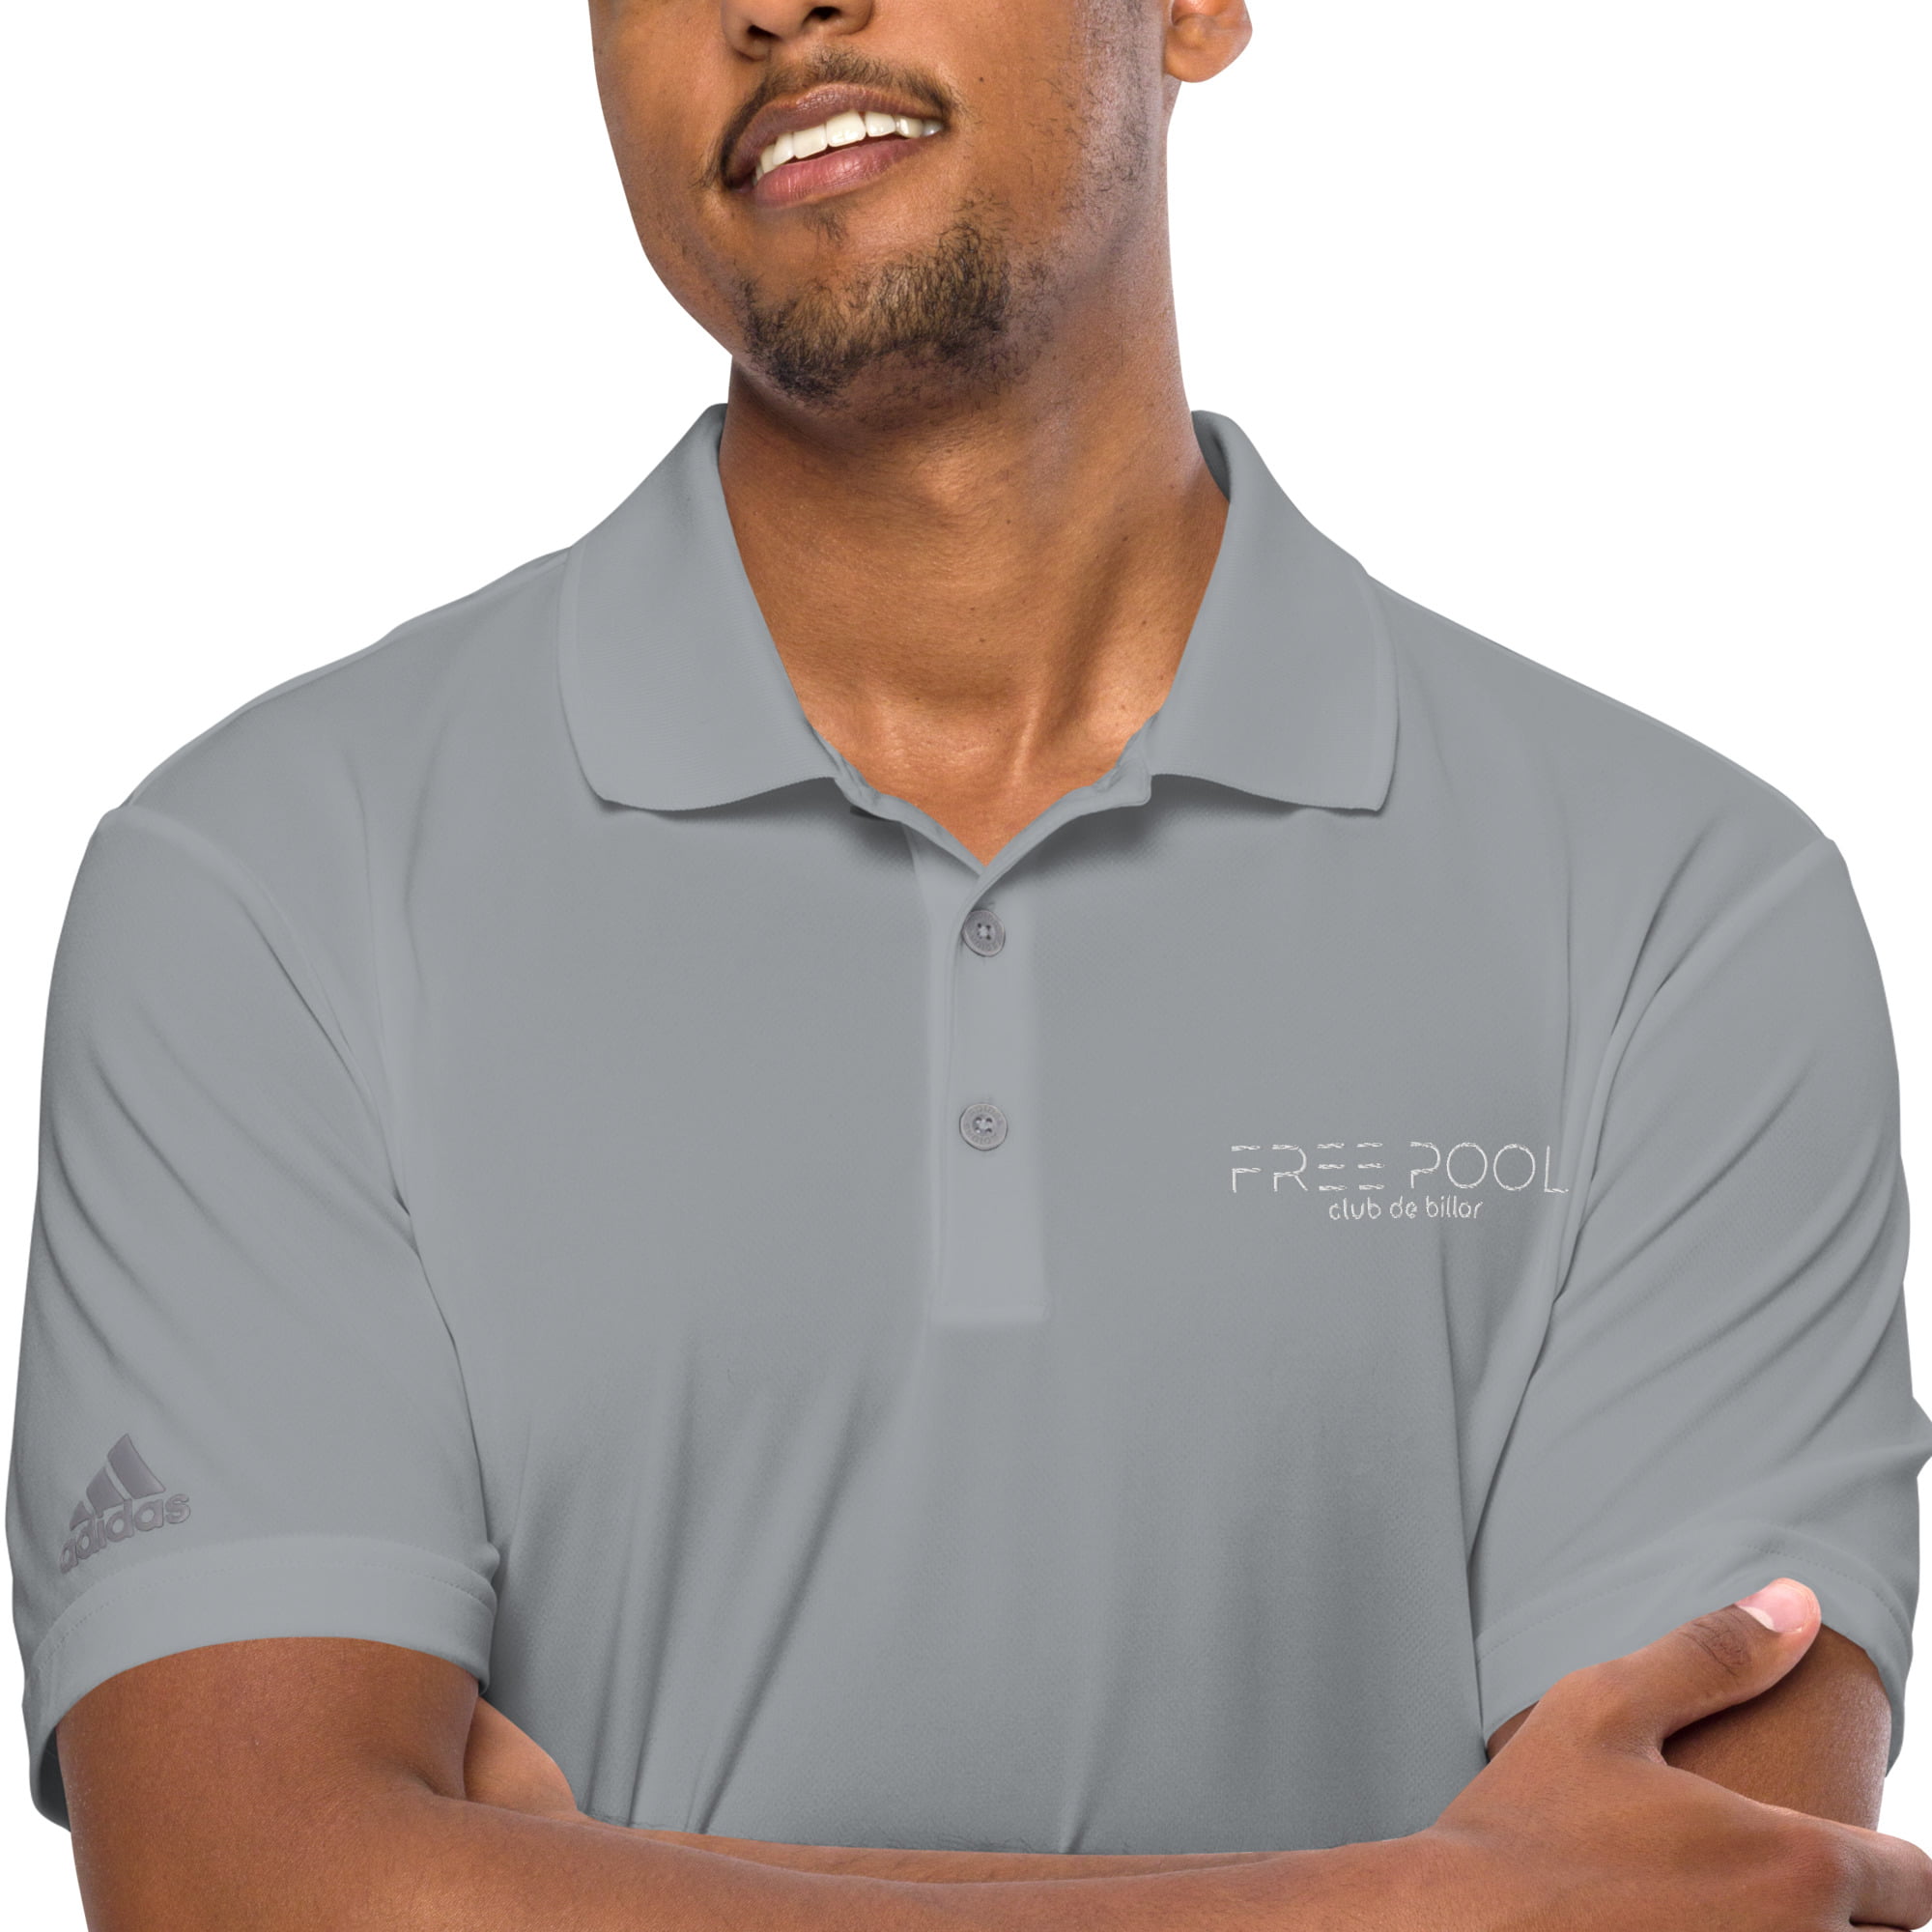 adidas-performance-polo-shirt-grey-zoomed-in-64864d02d44ce.jpg